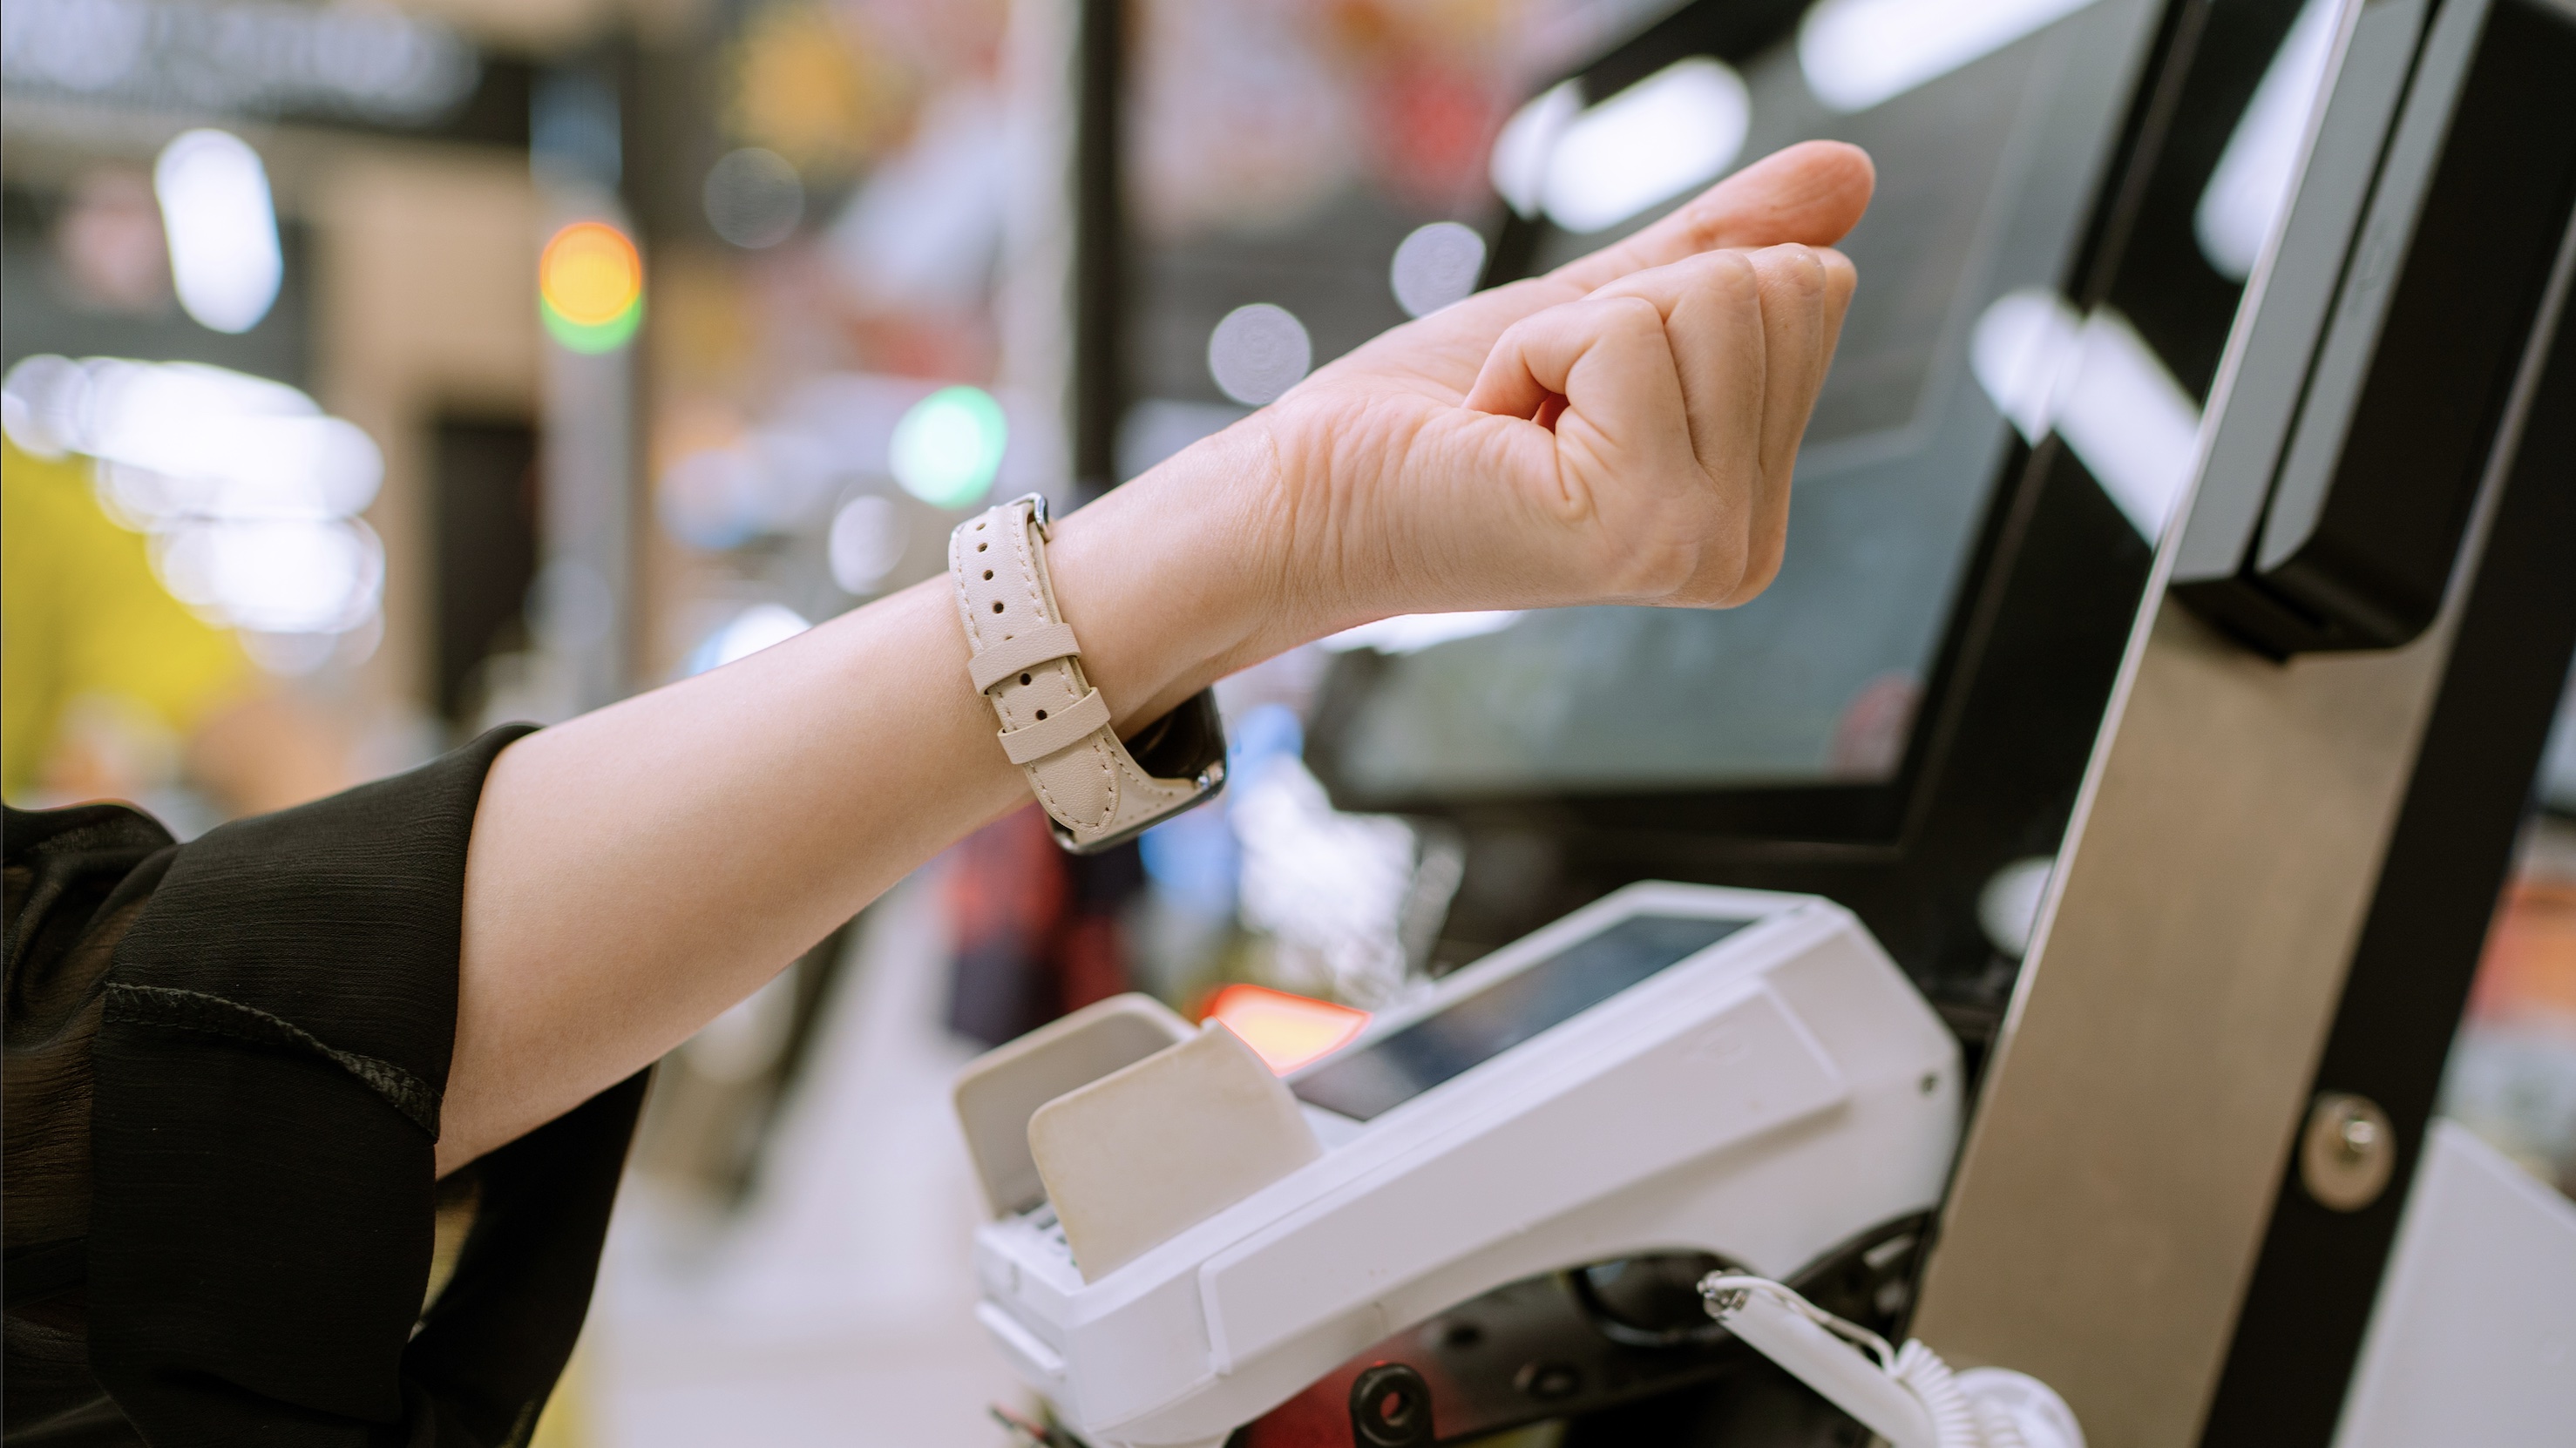 Customer self checkout and using contactless payment.